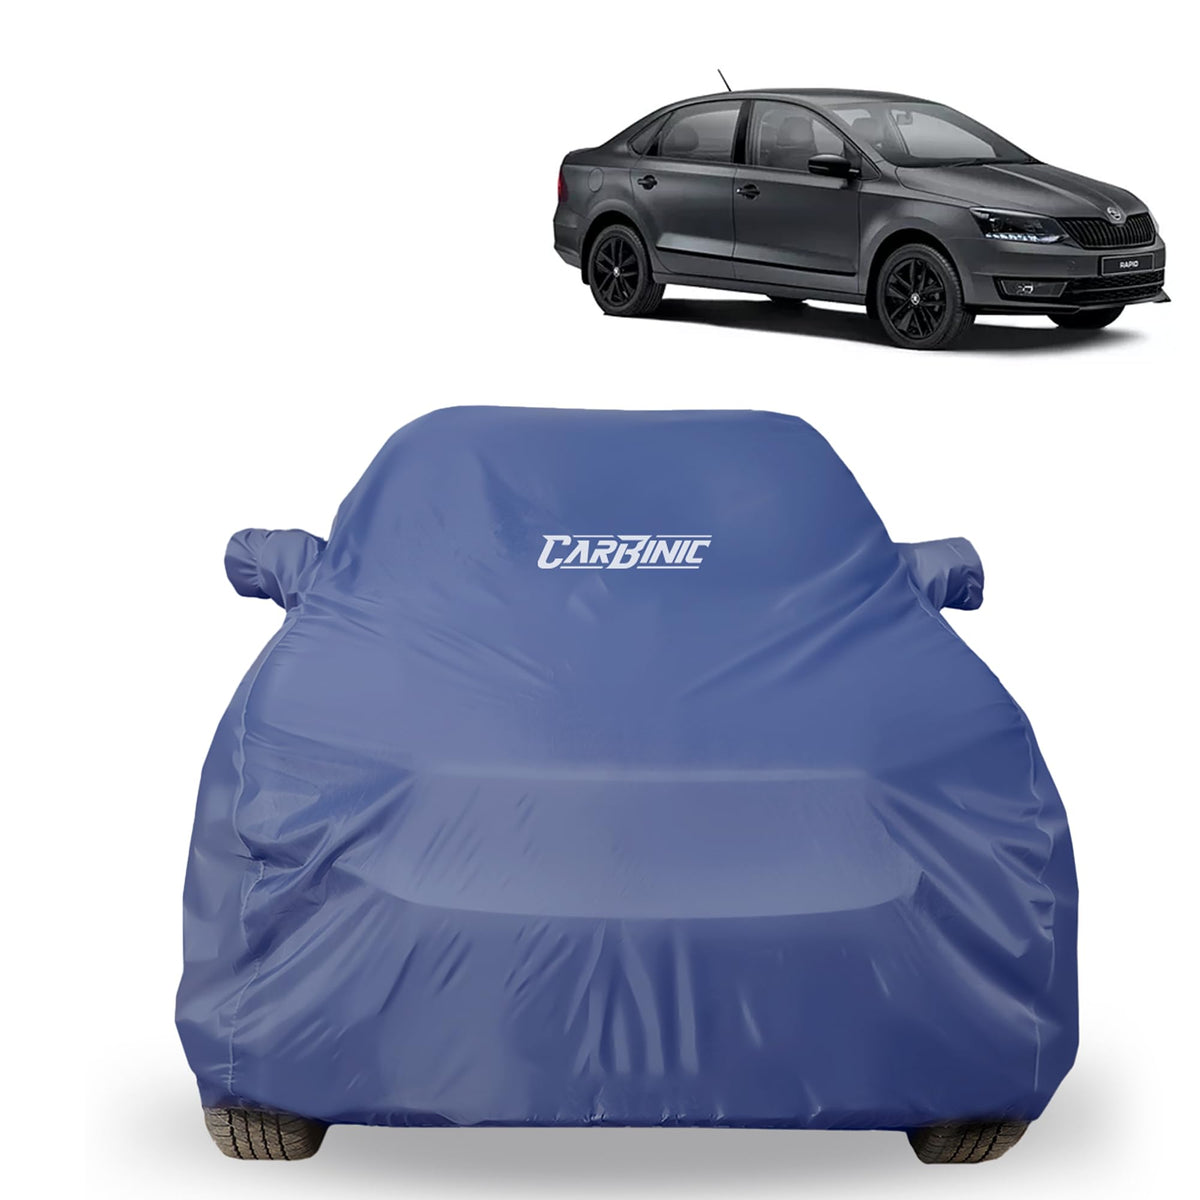 CARBINIC Car Body Cover for Skoda Rapid 2021 | Water Resistant, UV Protection Car Cover | Scratchproof Body Shield | All-Weather Cover | Mirror Pocket & Antenna | Car Accessories Dusk Blue